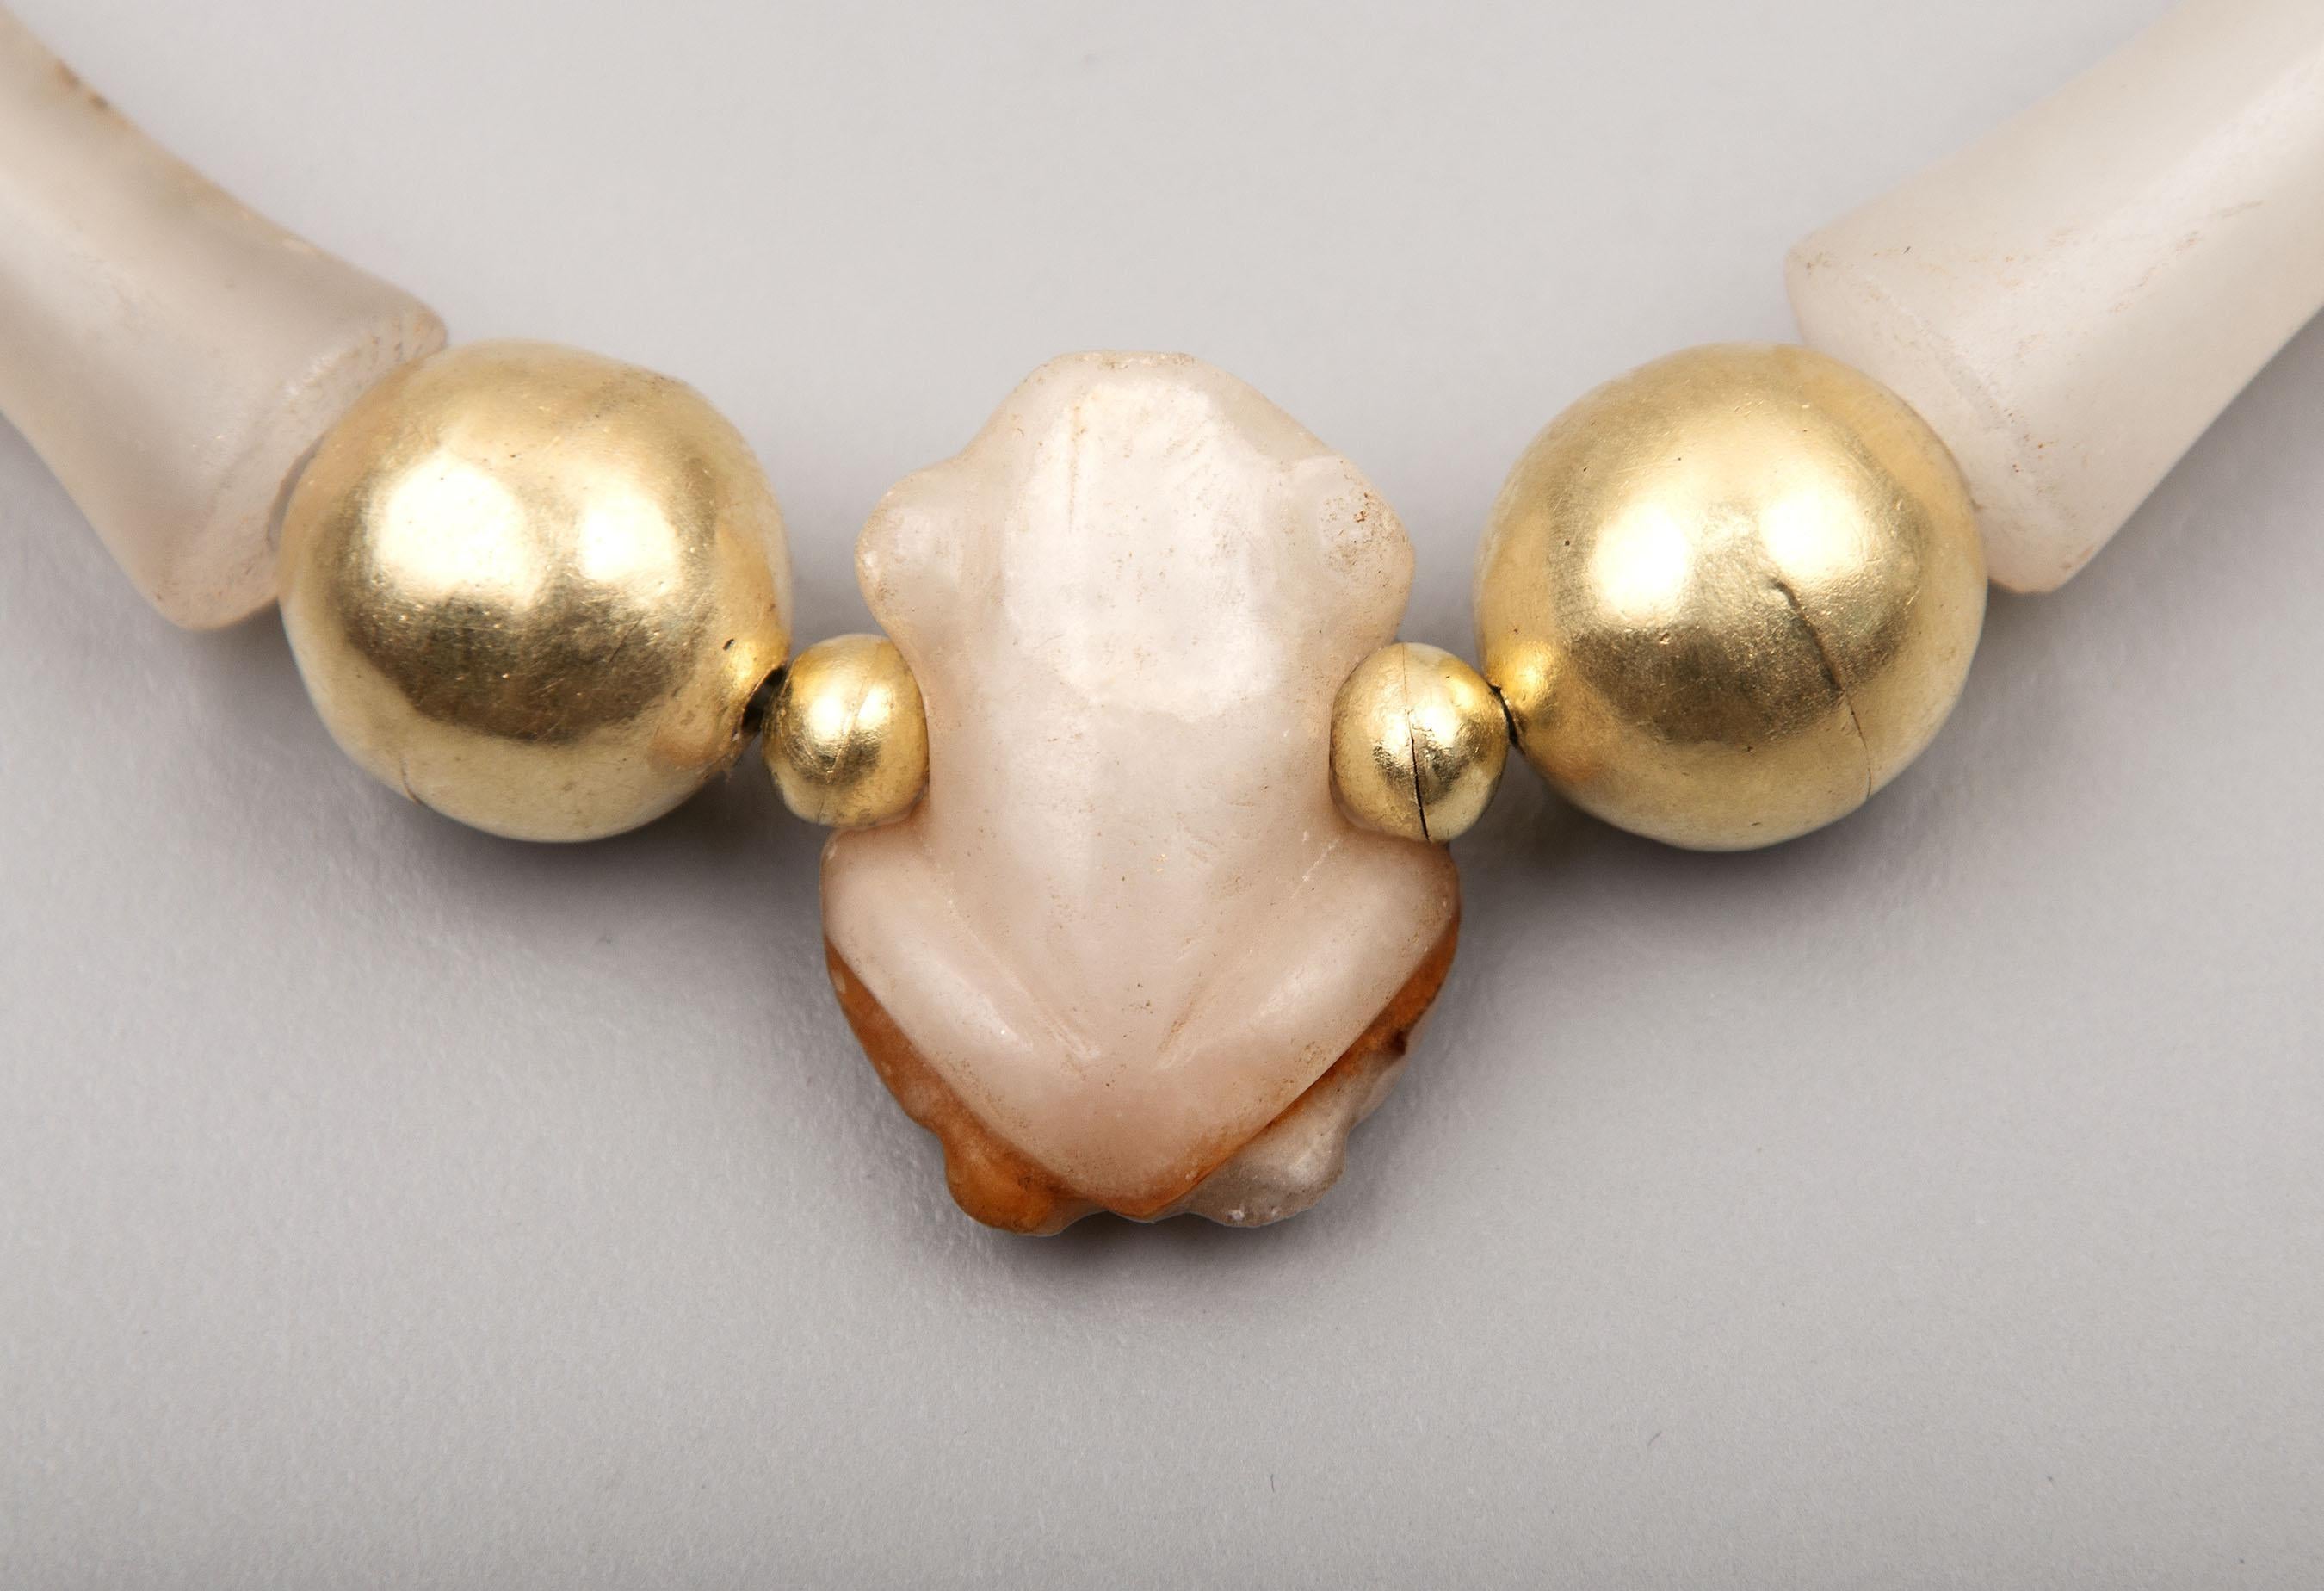 Eight flared chalcedony beads of uncommon size said to be from the Tairona people of Colombia, South America. In the center is a bead in the form of a frog, also made from white chalcedony. The center bead is 2.45 cm in height, 1.8 cm in width at